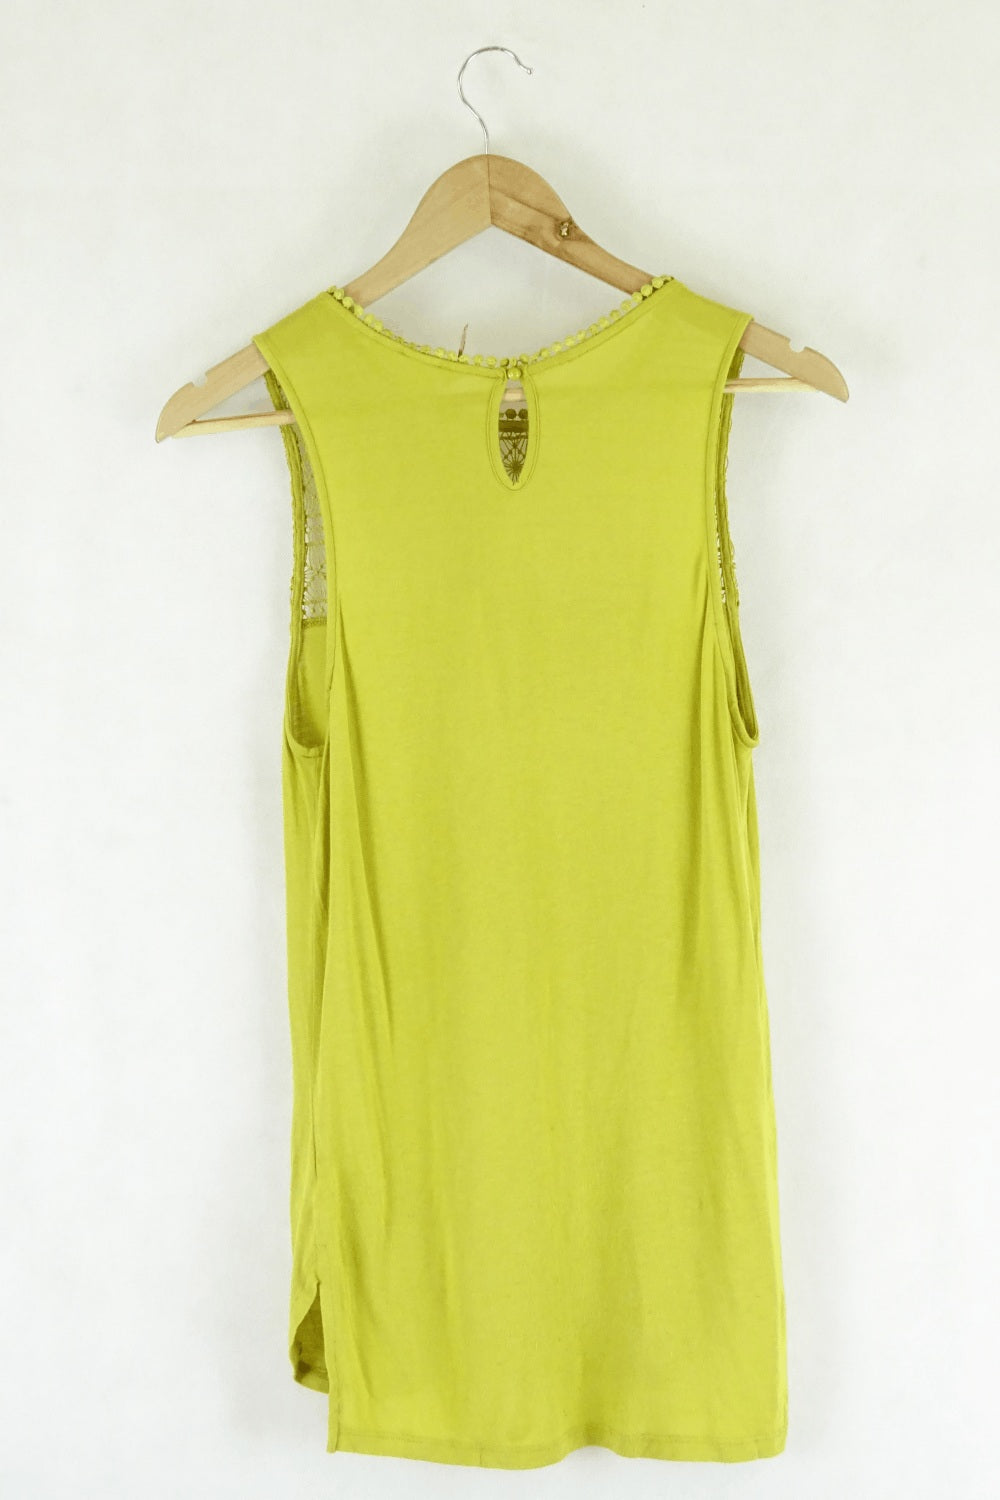 H&amp;M Yellow Mustard Top Lace S